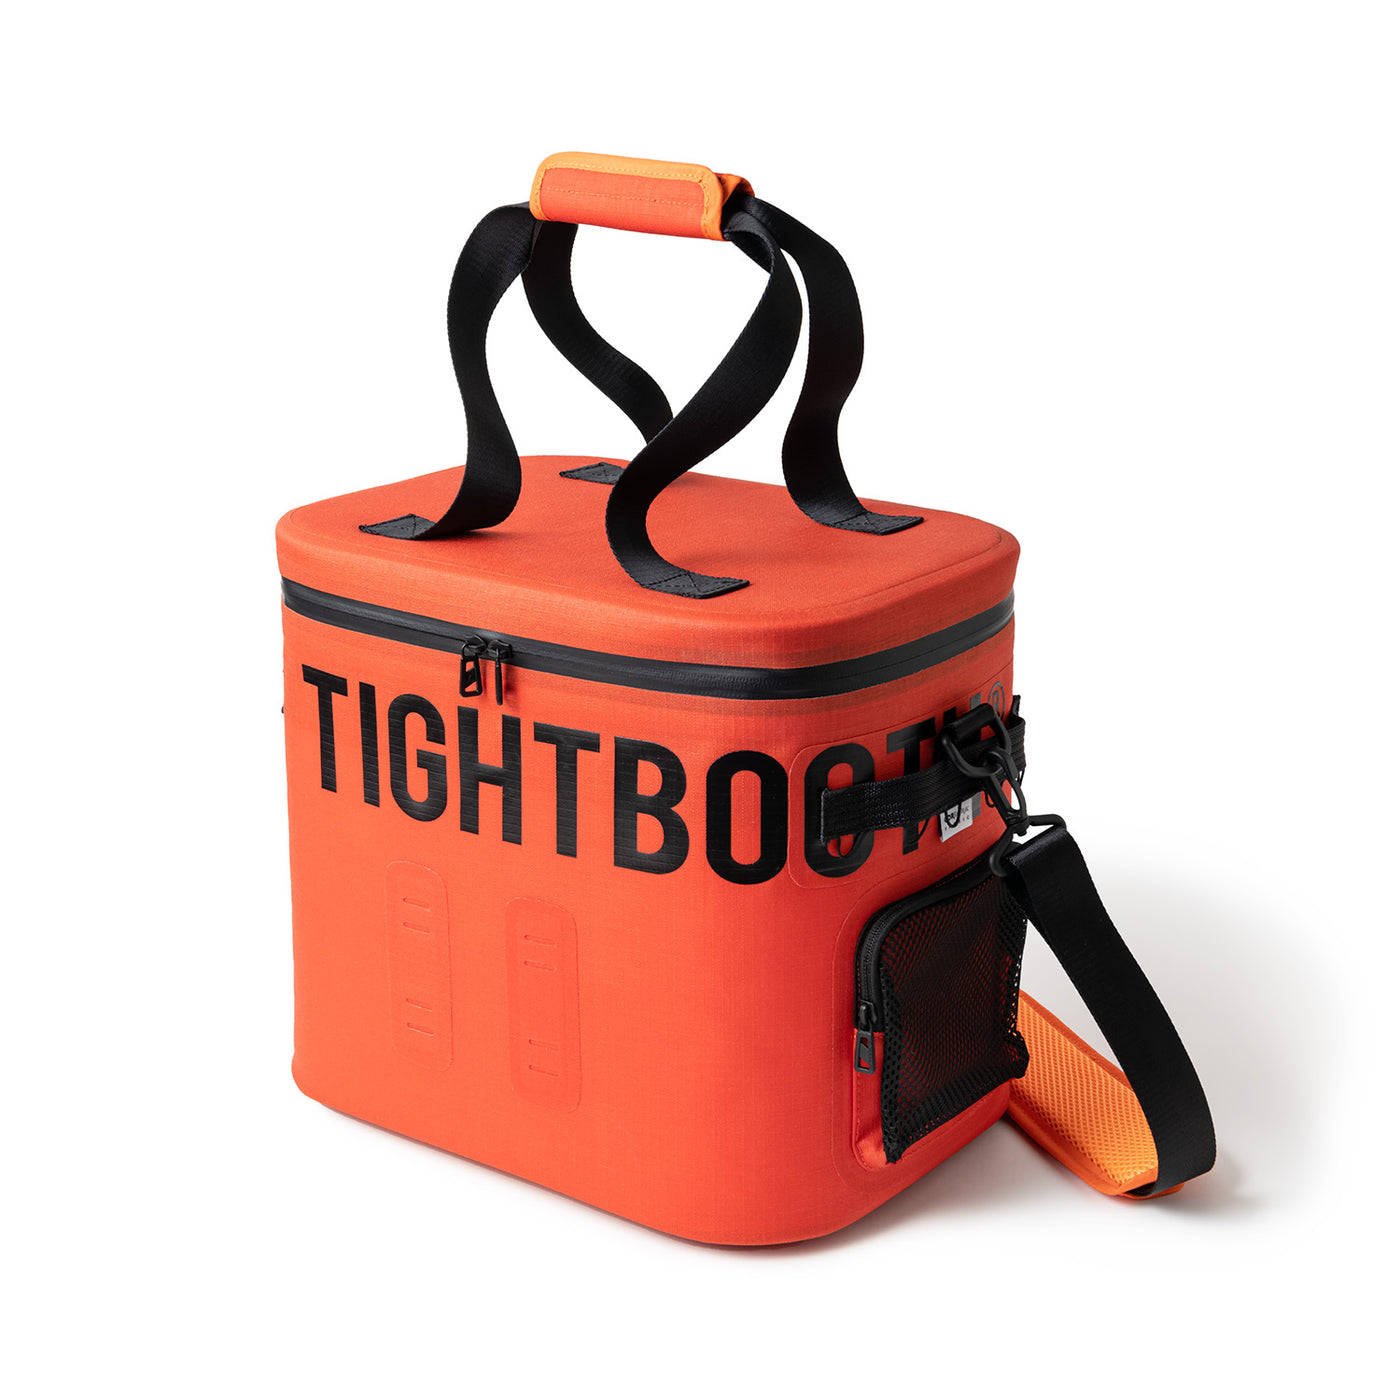 TIGHTBOOTH x F/CE. COOLER CONTAINER - Why are you here?